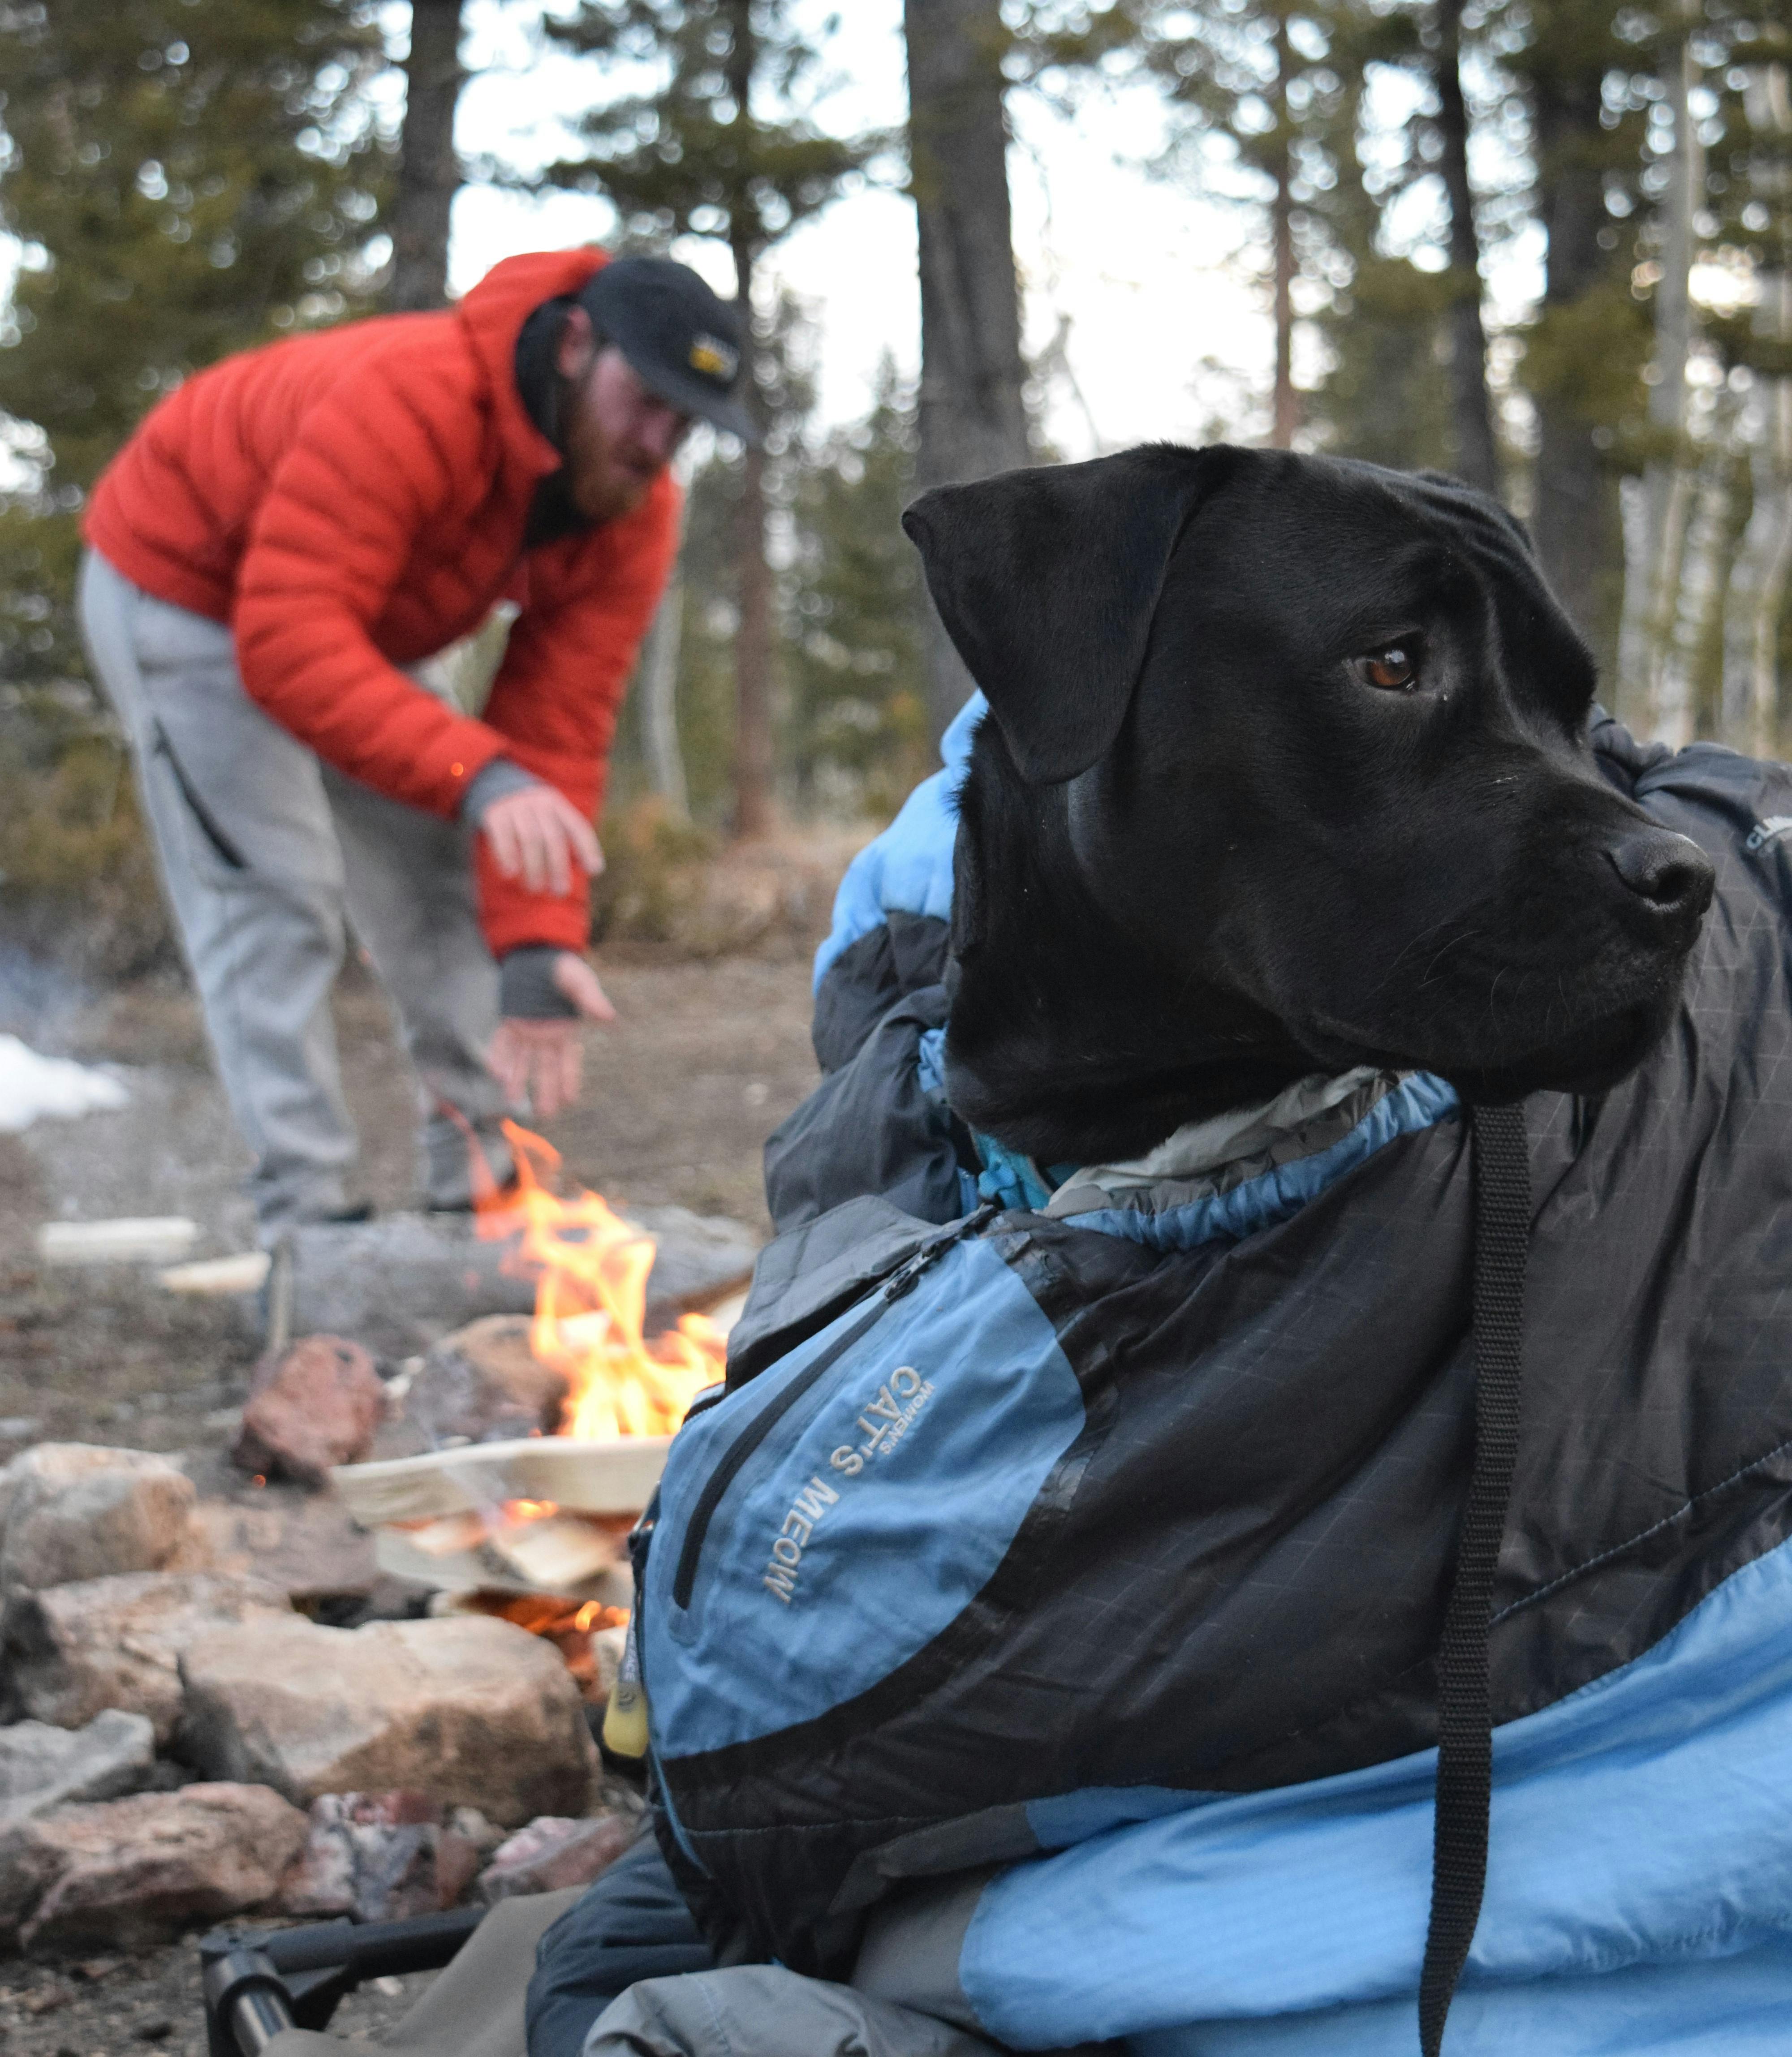 A black lab dog zipped up in a cozy sleeping bag while a hiker in a red jacket leans over a campfire in the background